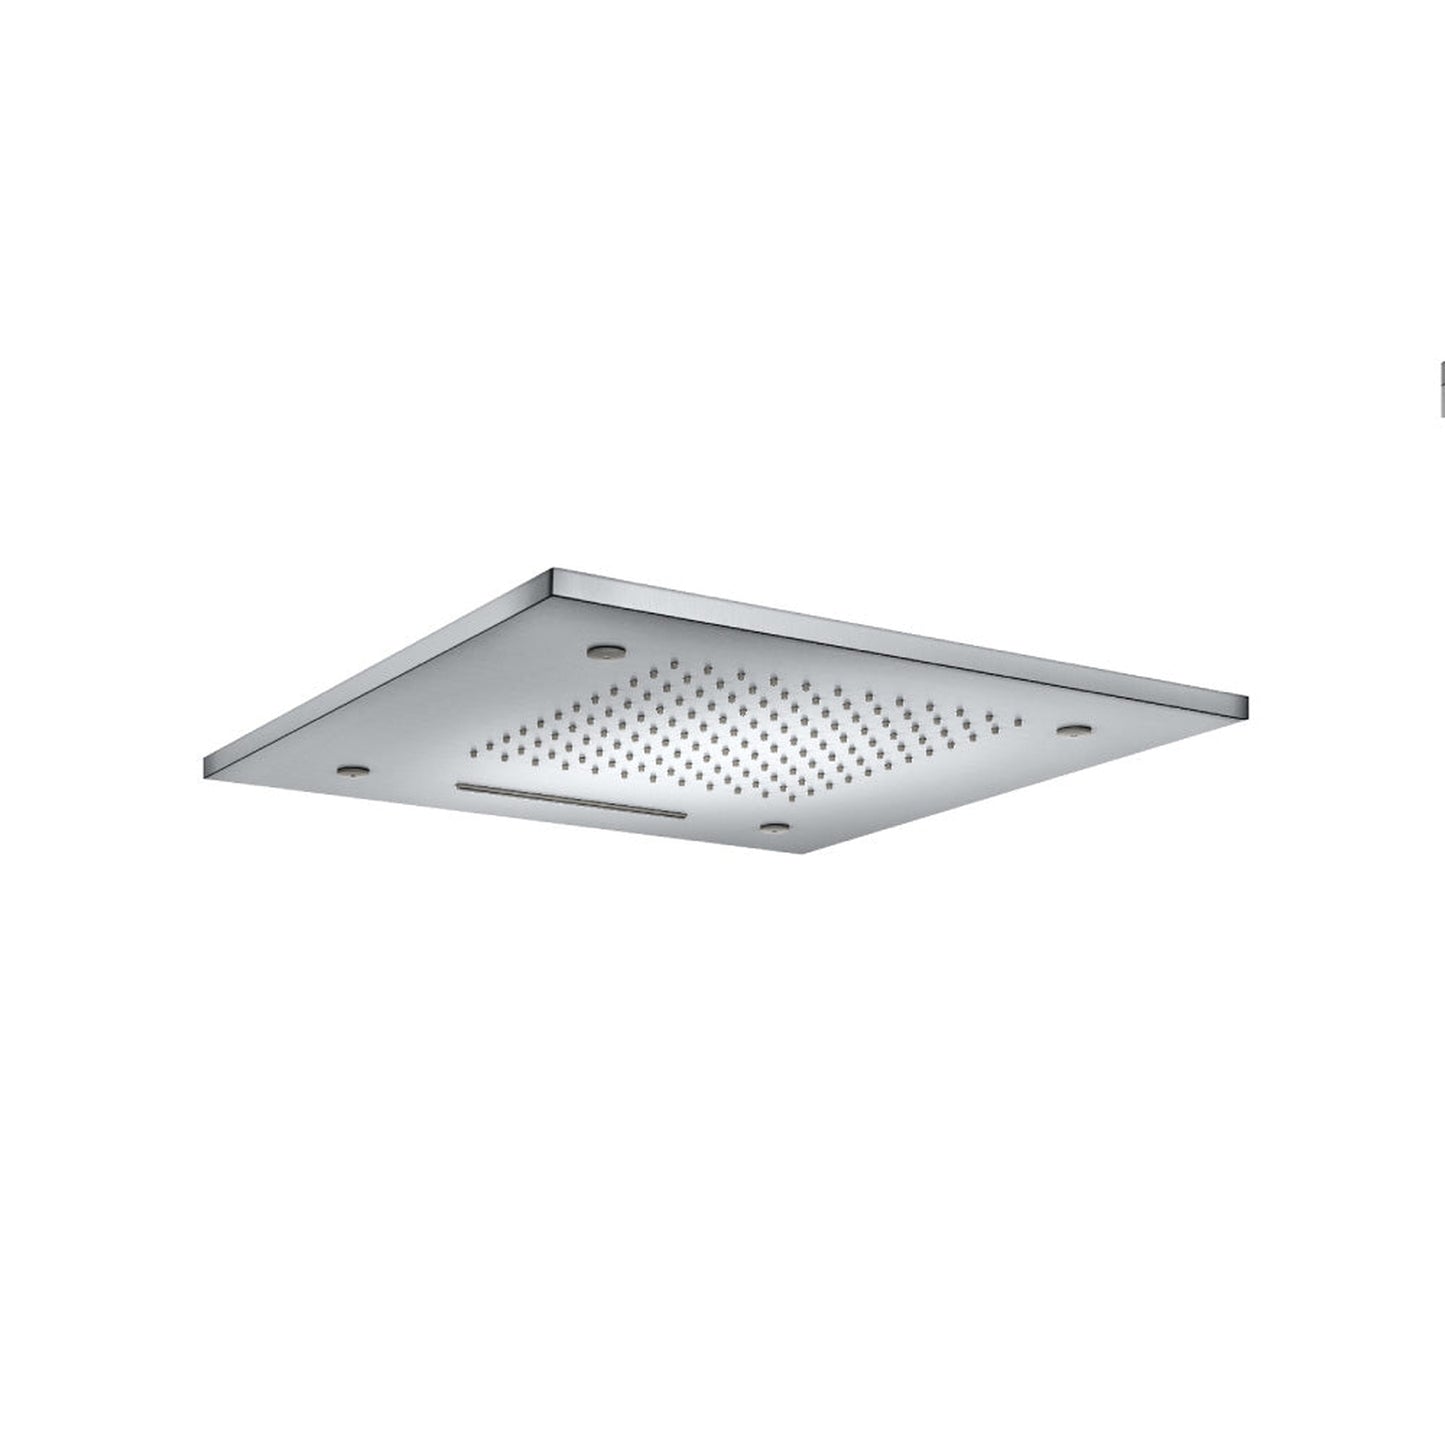 Isenberg Cascade 20" Stainless Steel Flush Mount Rainhead With Cascade Waterfall and Mist Flow in Gloss White